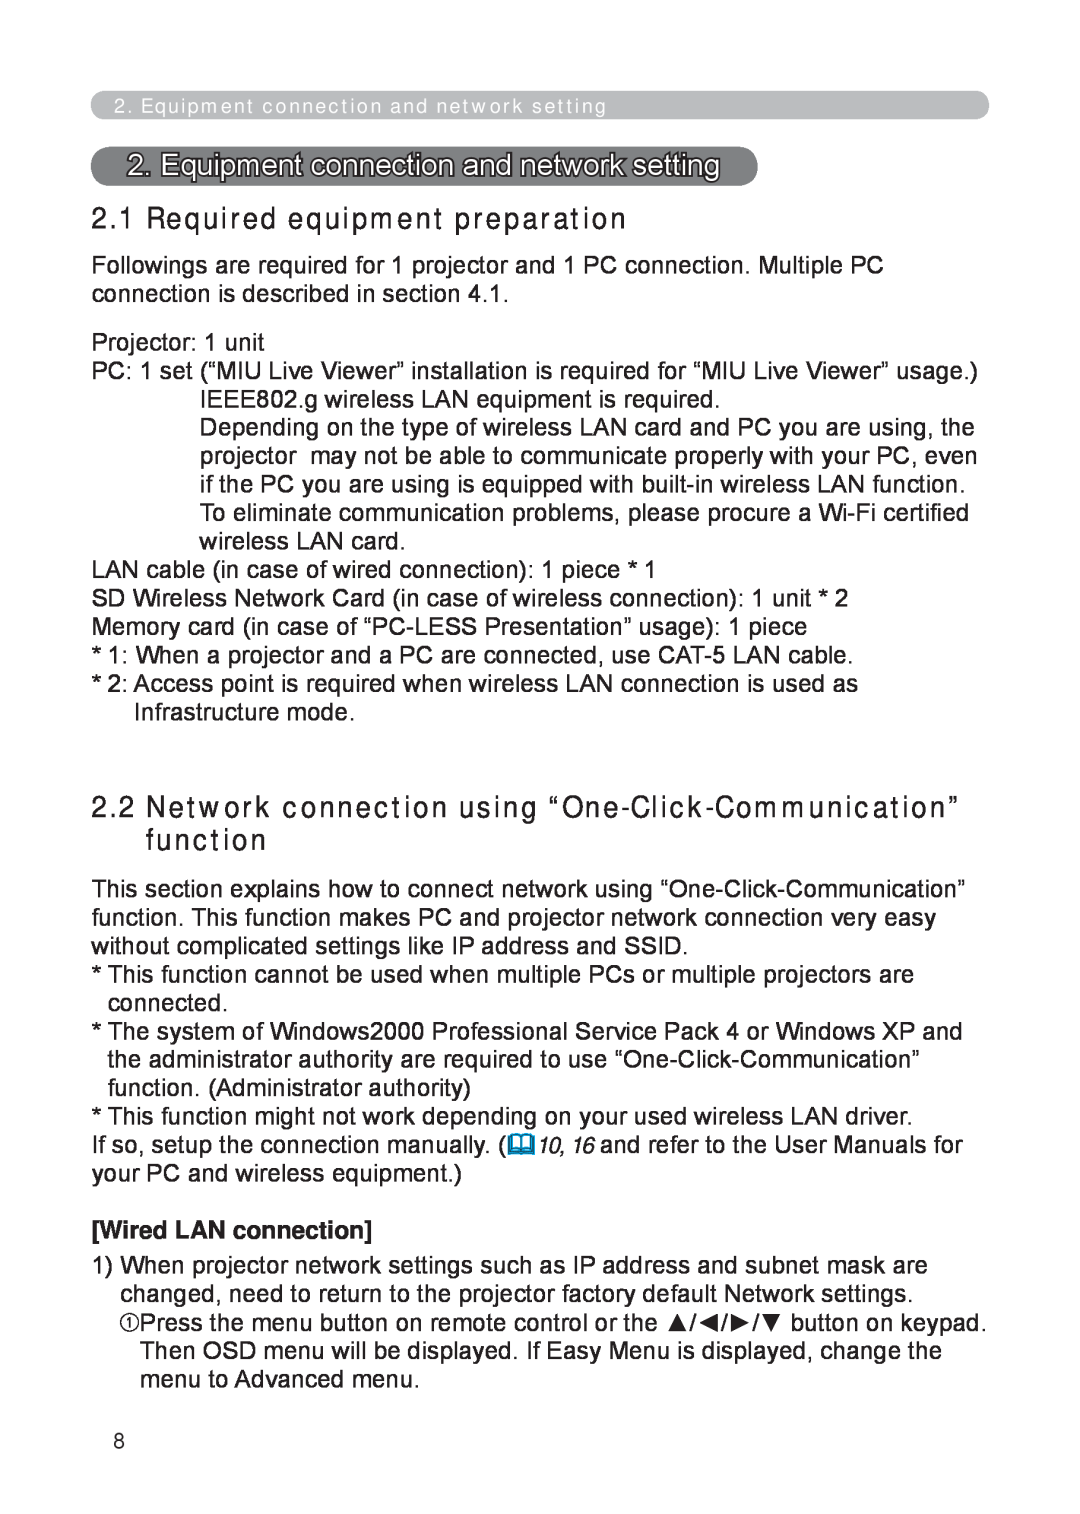 3M X62w manual Equipment connection and network setting, Required equipment preparation, Wired LAN connection 